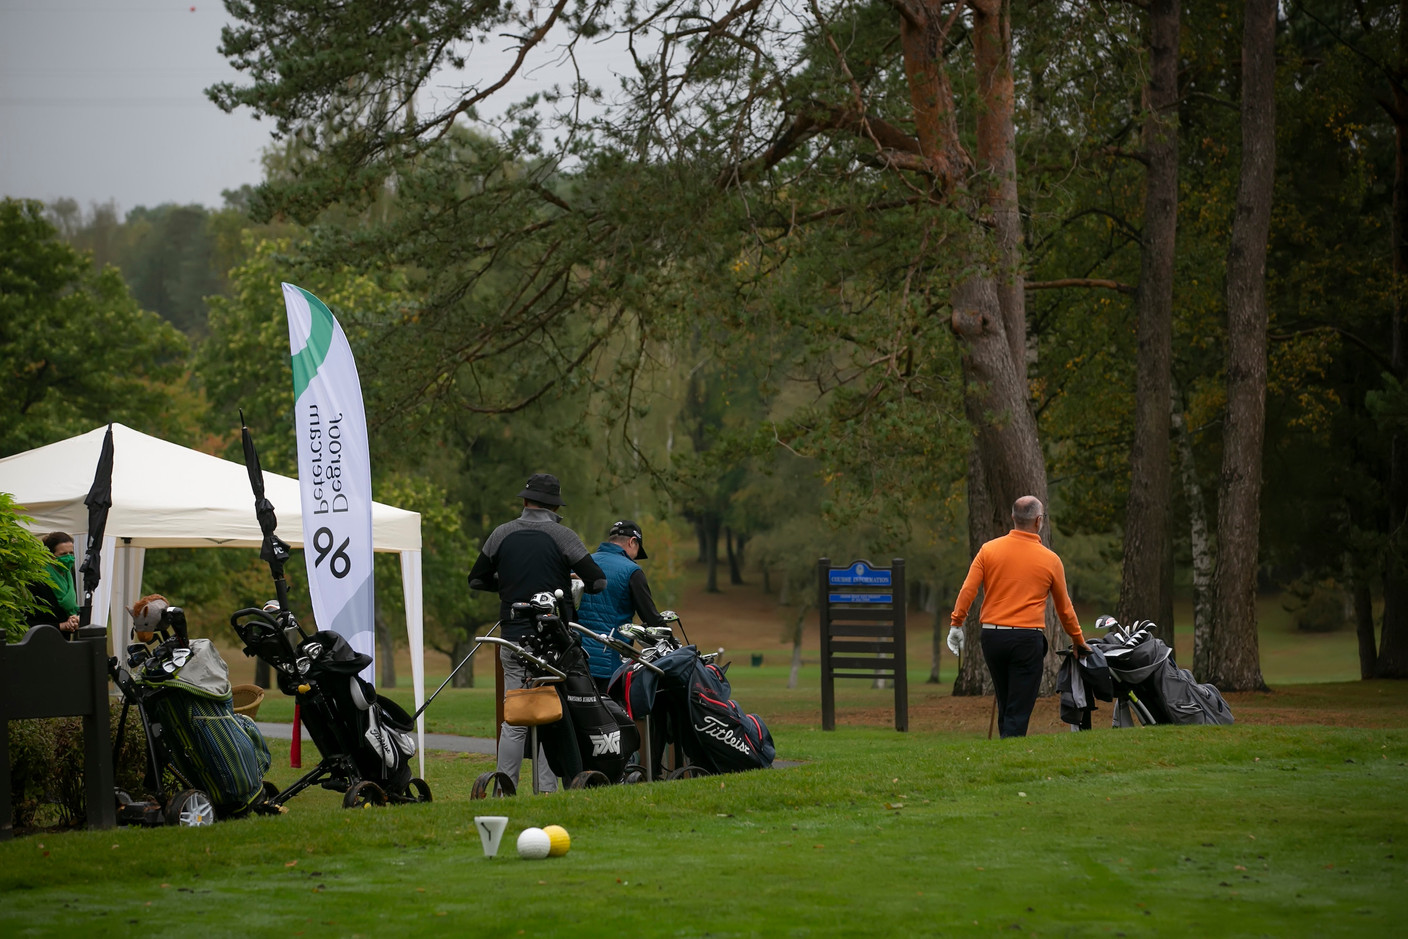 Degroof Petercam Luxembourg Golf Cup 2020 - 30.09.2020 (Photo: Blitz Agency)